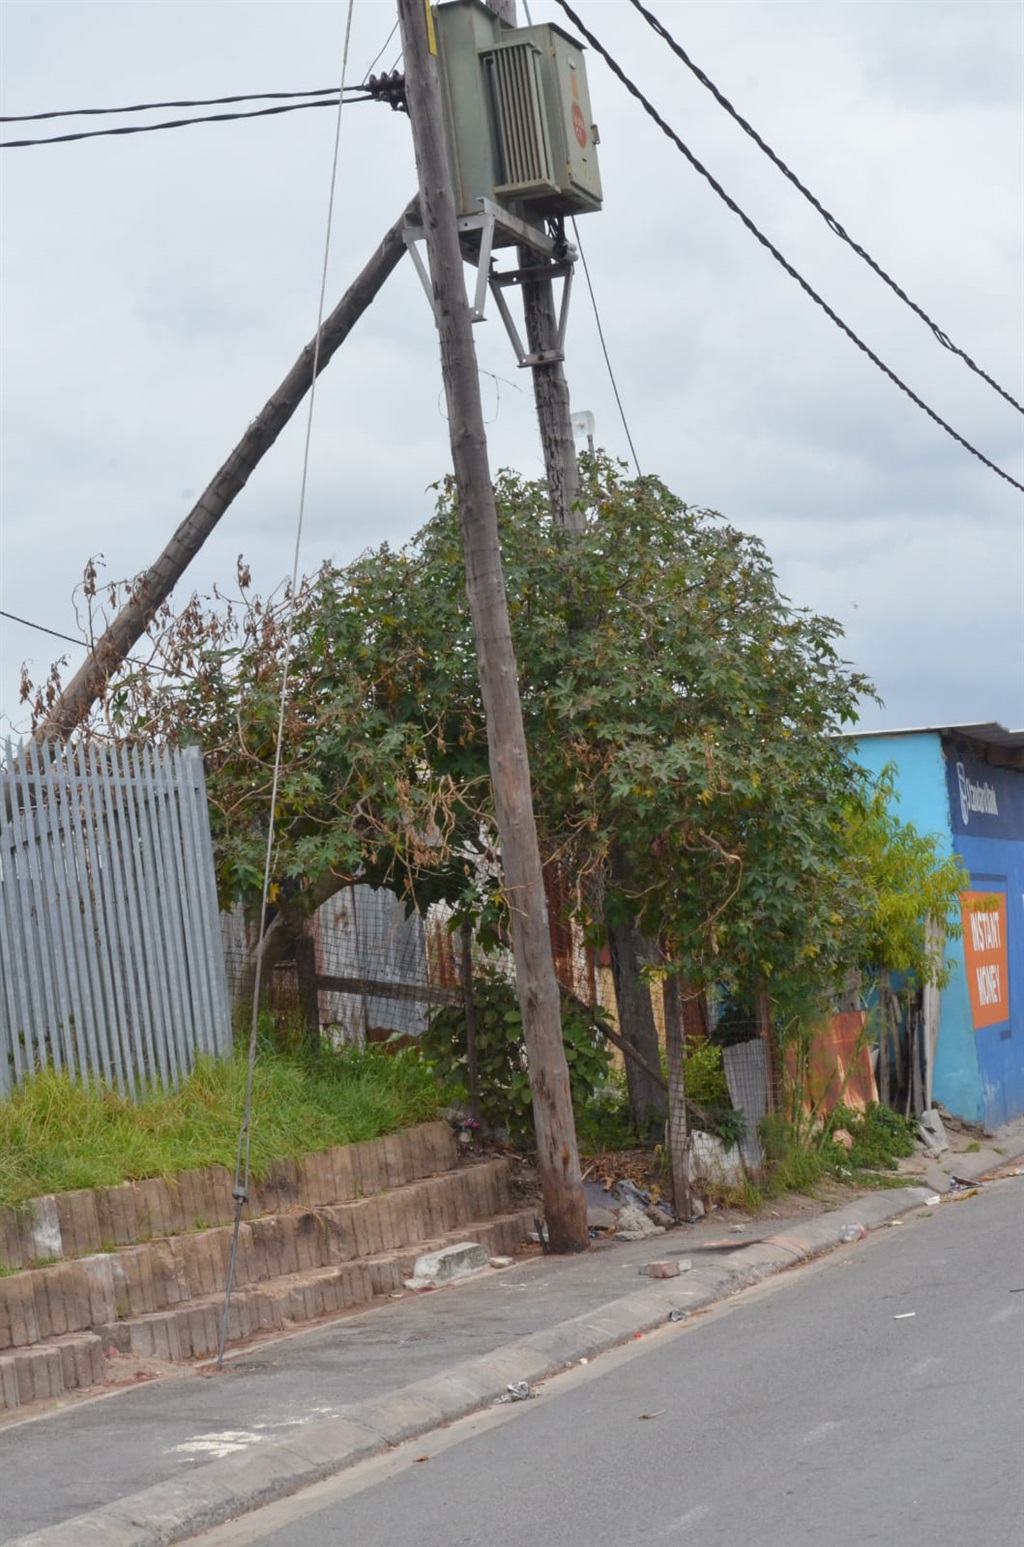 A man was electrocuted to death while cutting electricity cables. Photo by Lulekwa Mbadamane